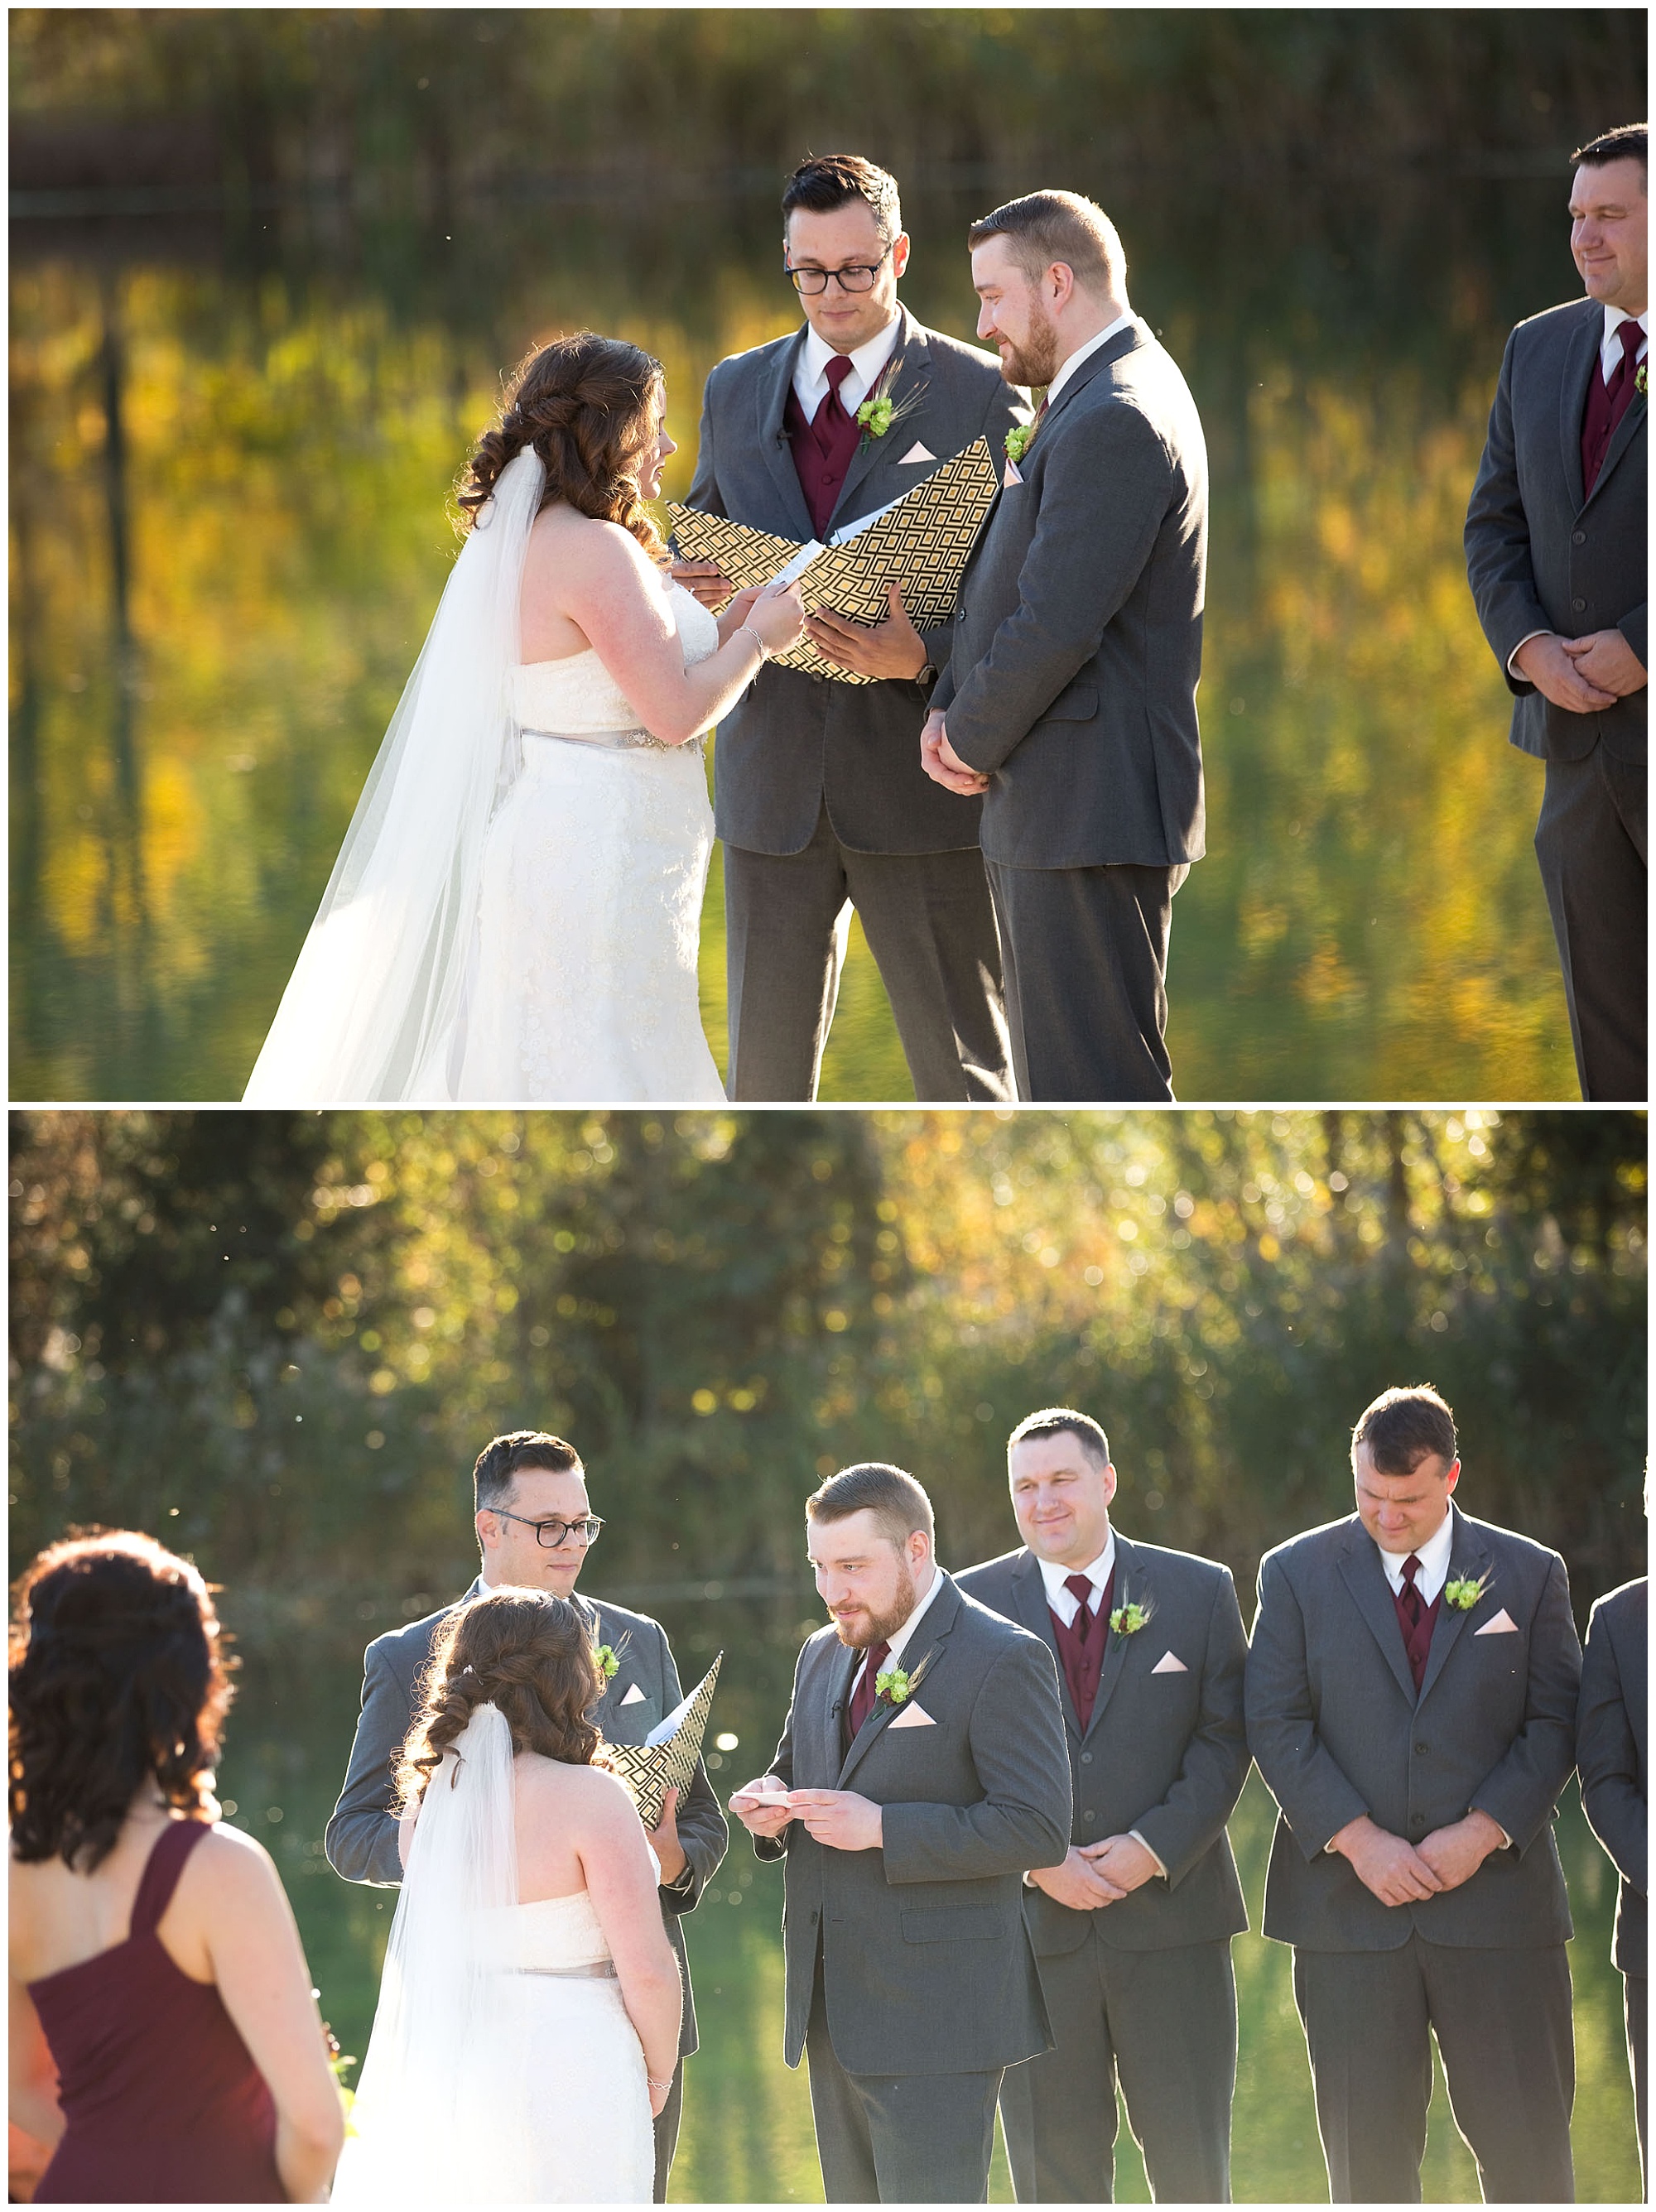 Two photos of a bride and groom reciting their wedding vows to eachother during the pond side ceremony in autumn.